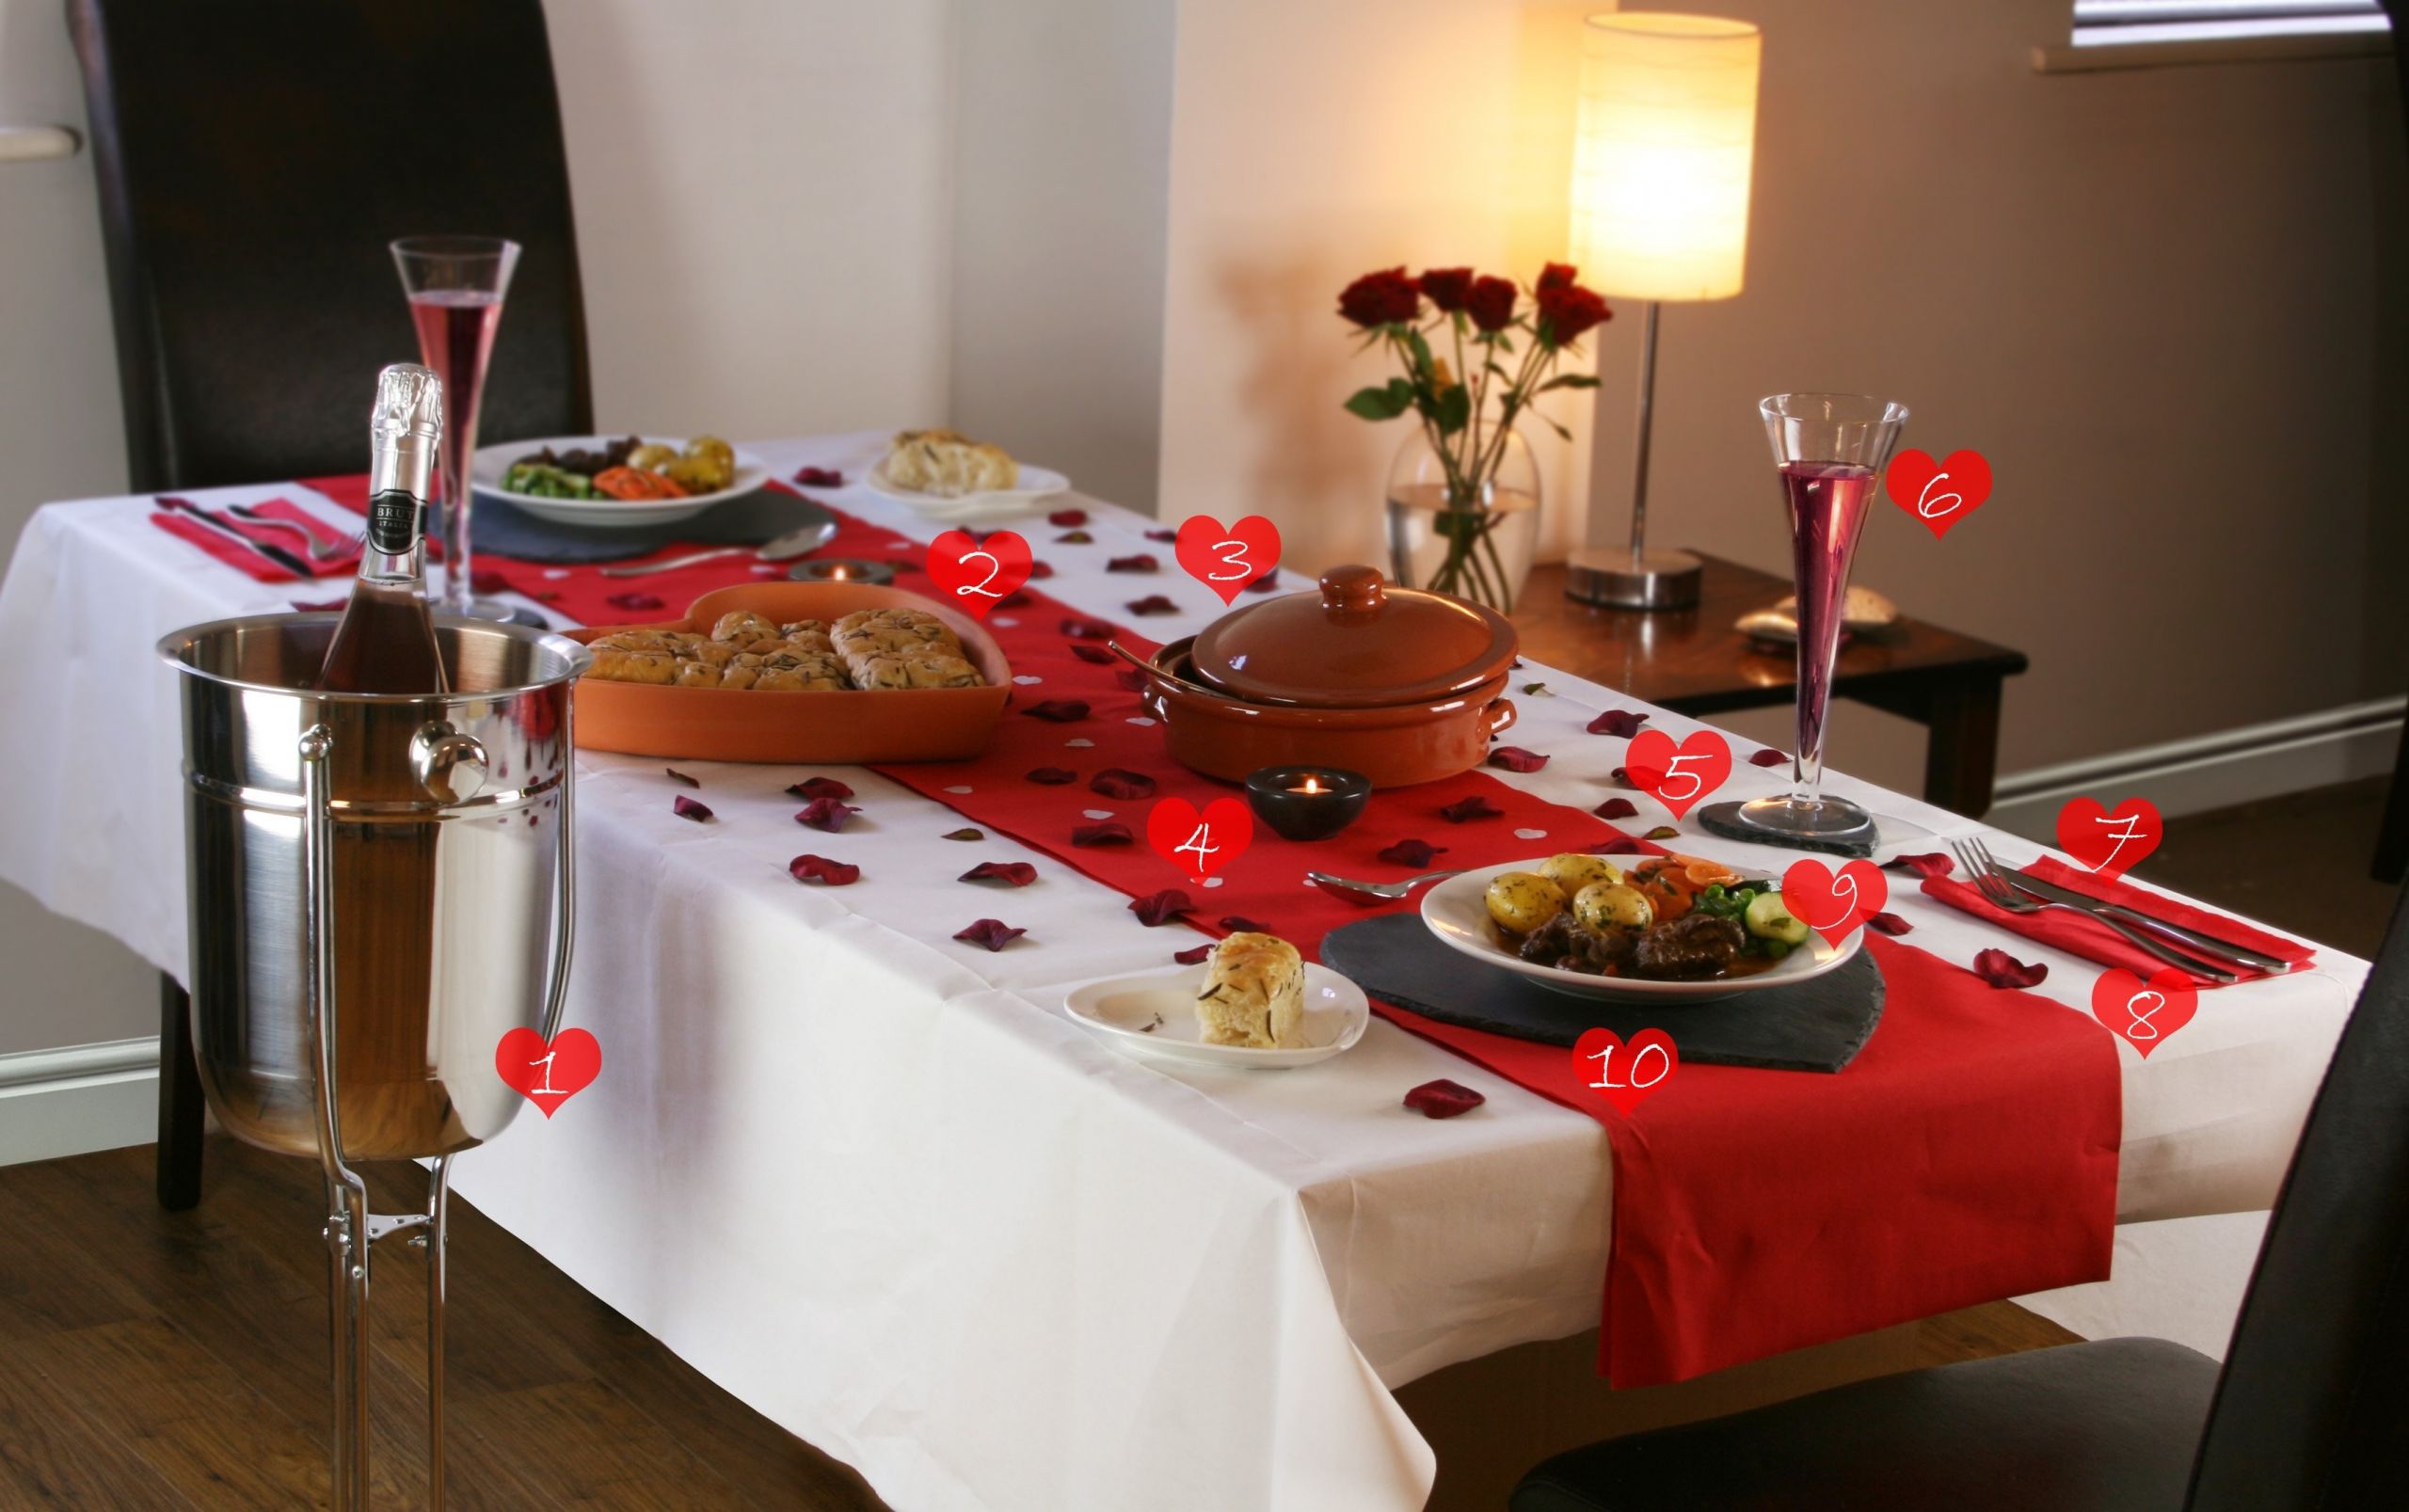 Romantic Valentines Dinners at Home Elegant 10 Famous Romantic Dinner Ideas at Home 2020